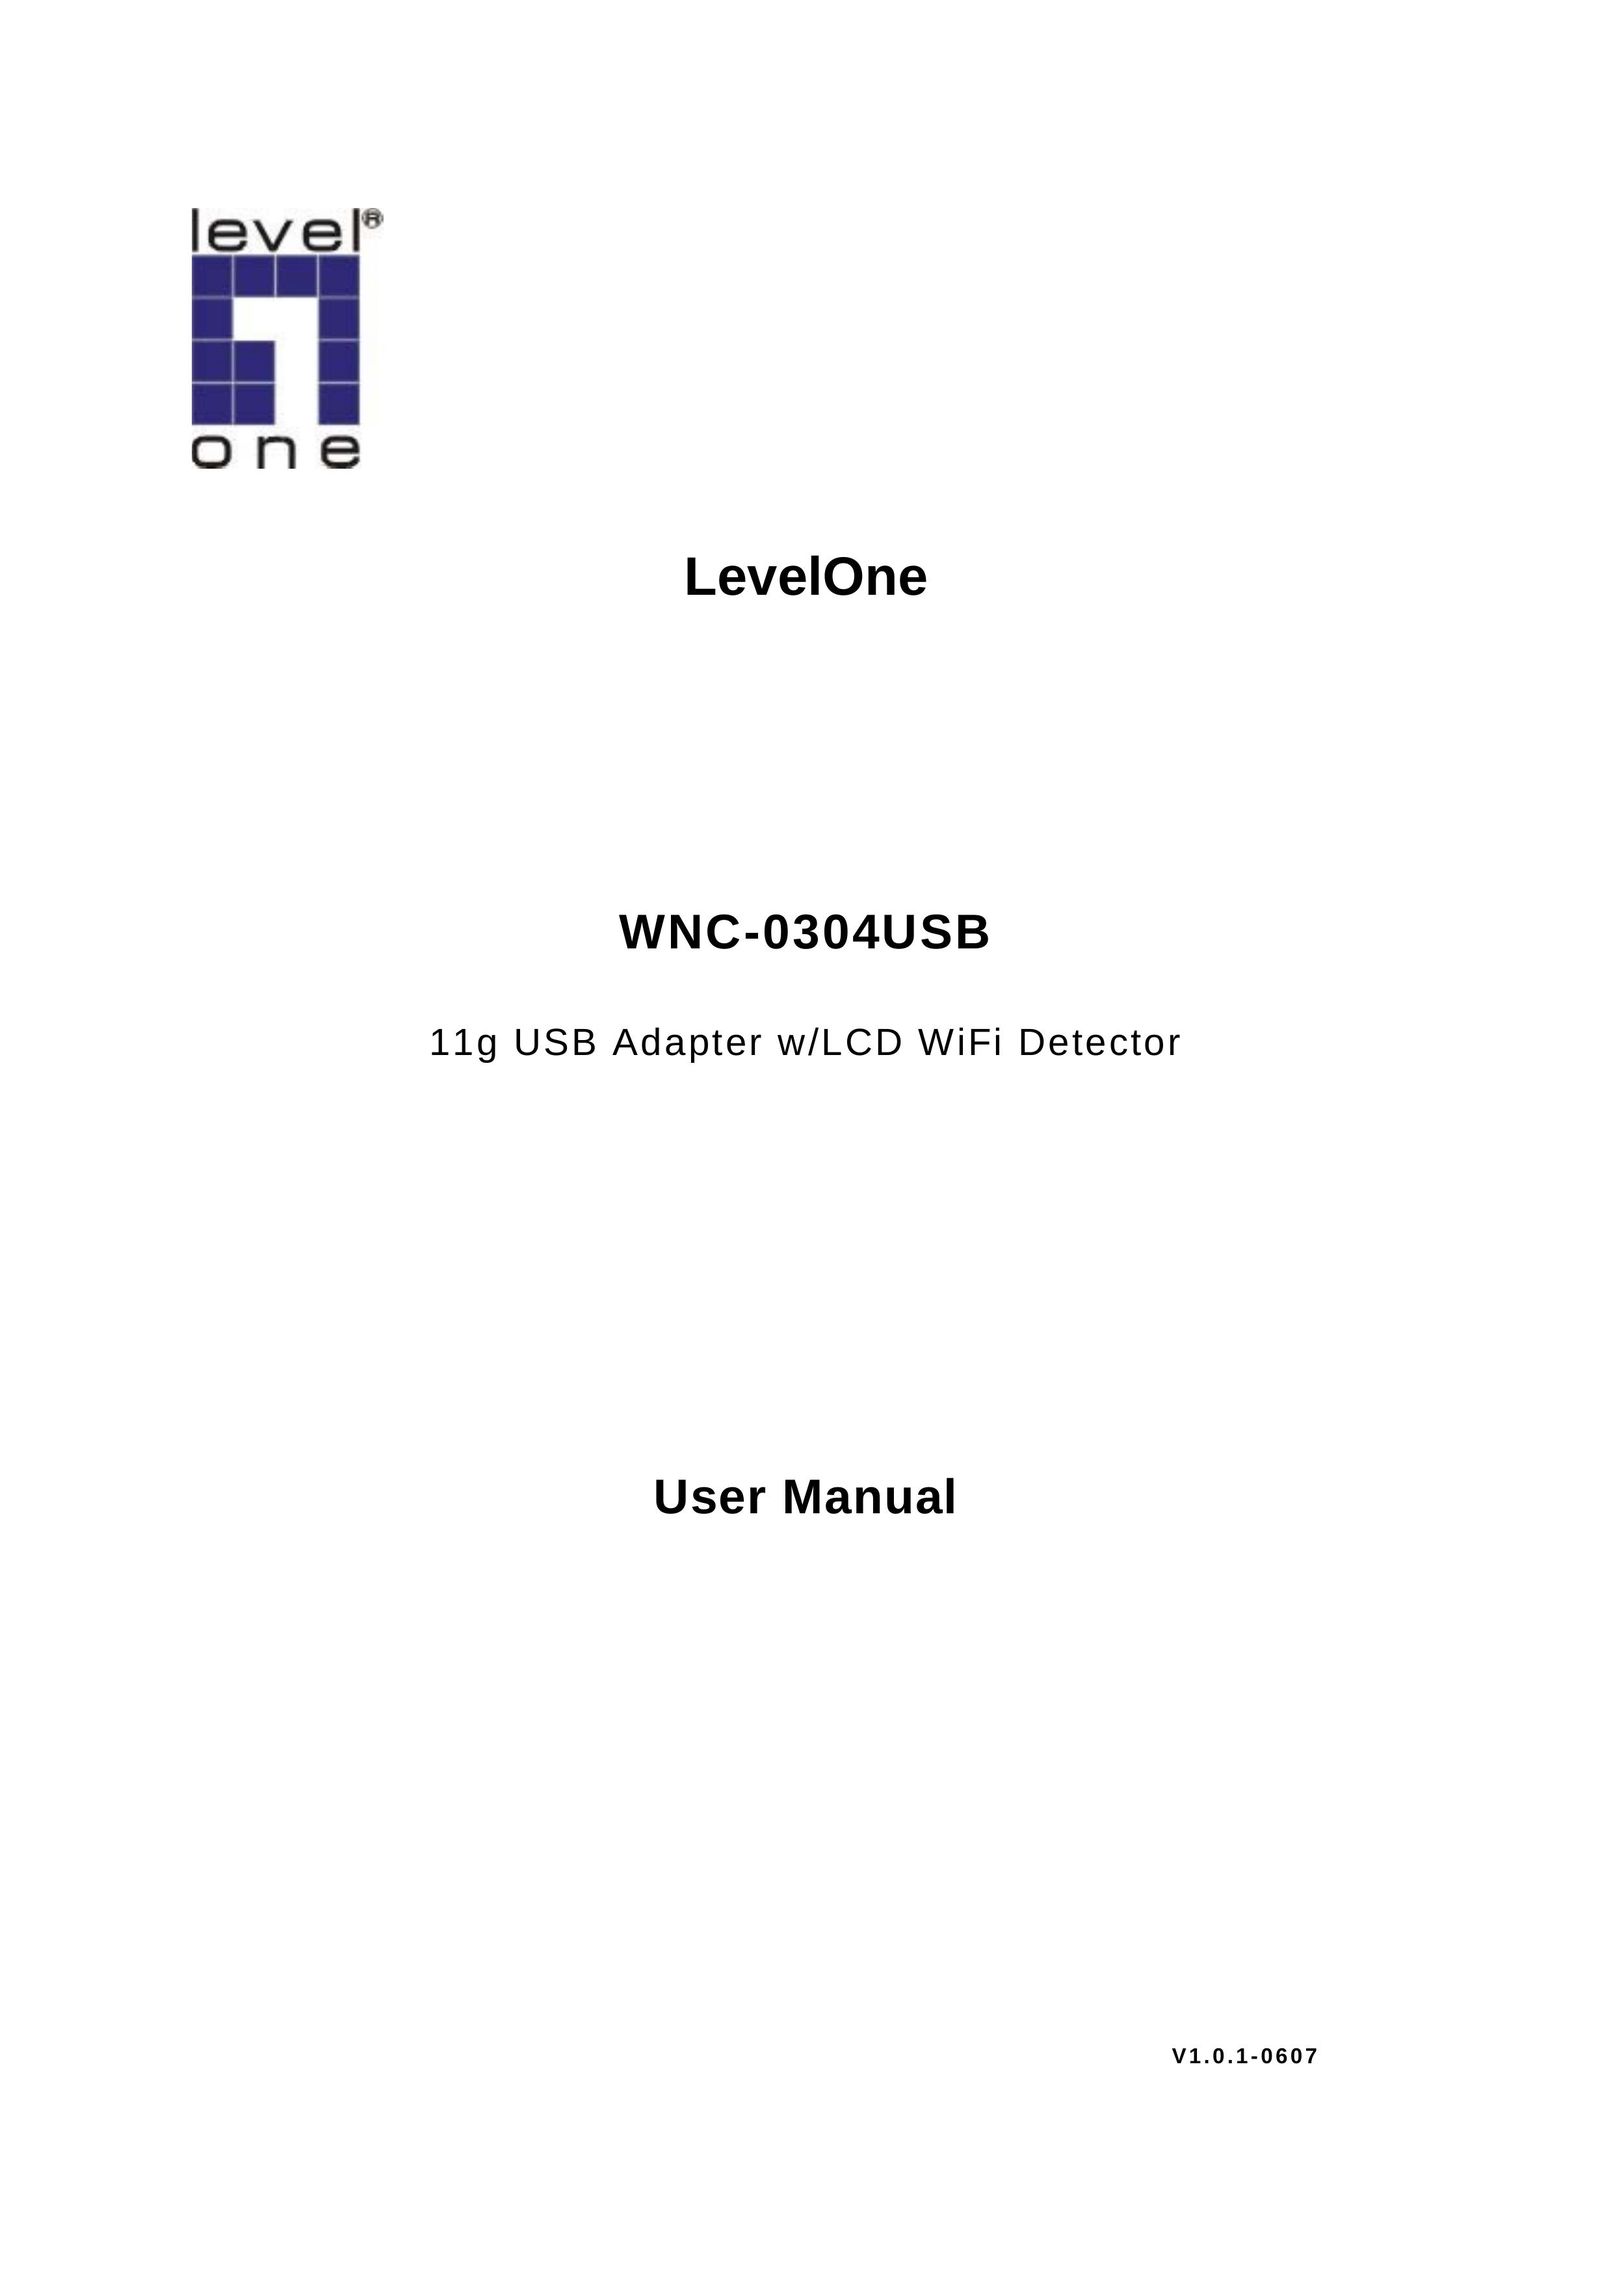 LevelOne 11g USB Adapter w/LCD WiFi Detector Computer Hardware User Manual